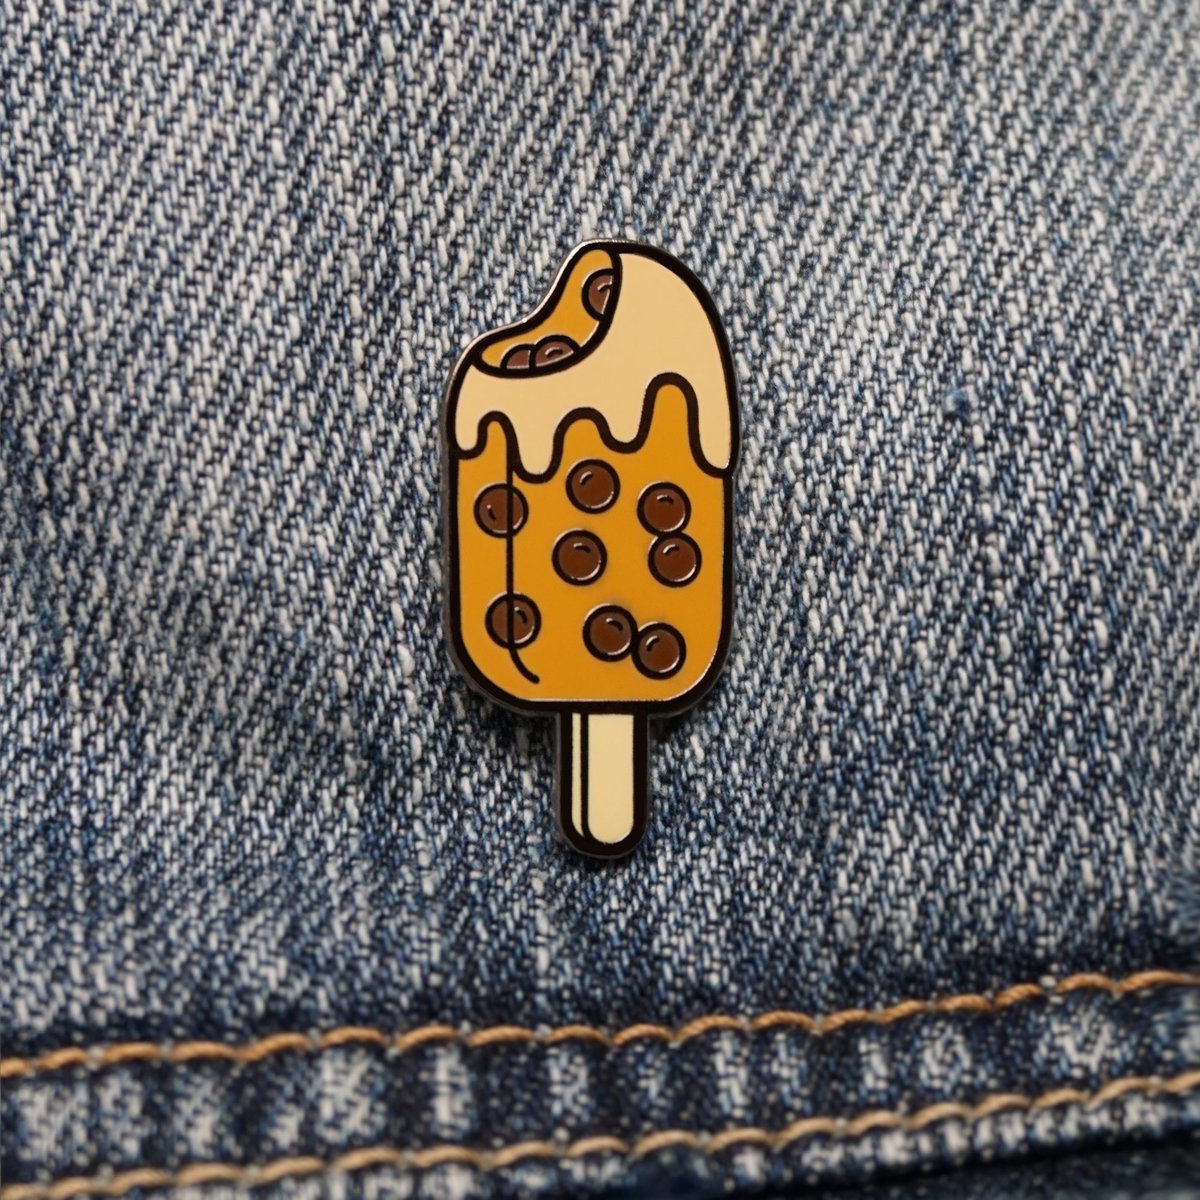 We’re super excited to announce one of our favorite desserts as our newest pin: the Brown Sugar Boba Ice Cream Bar!
onpointpins.com/collections/fo…
___
#Bobabar #bobaicecream #enamelpins #pins